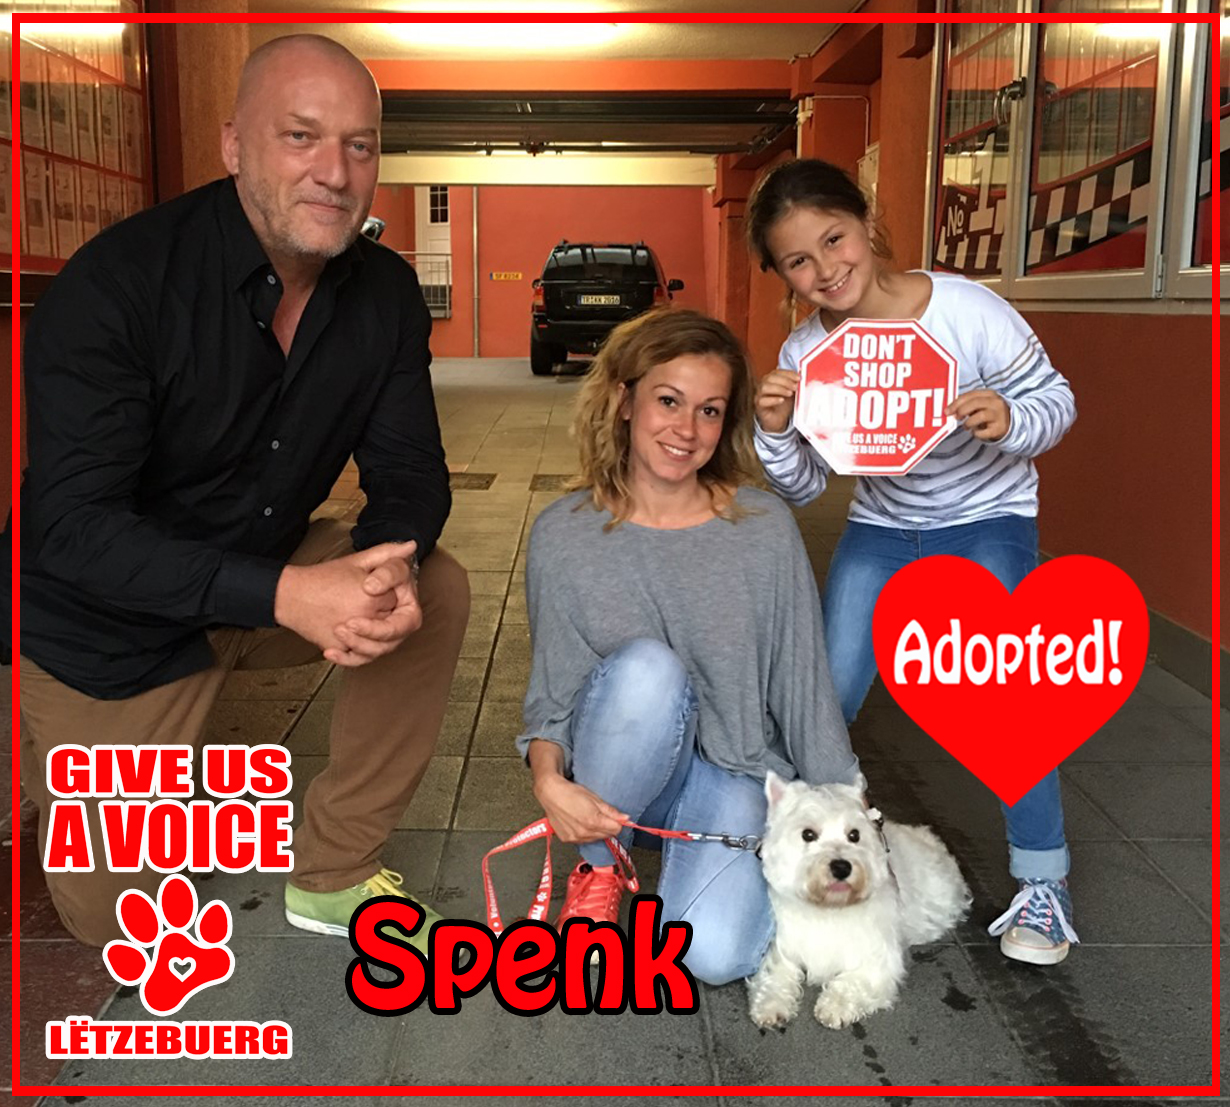 Spenk Adopted! copy